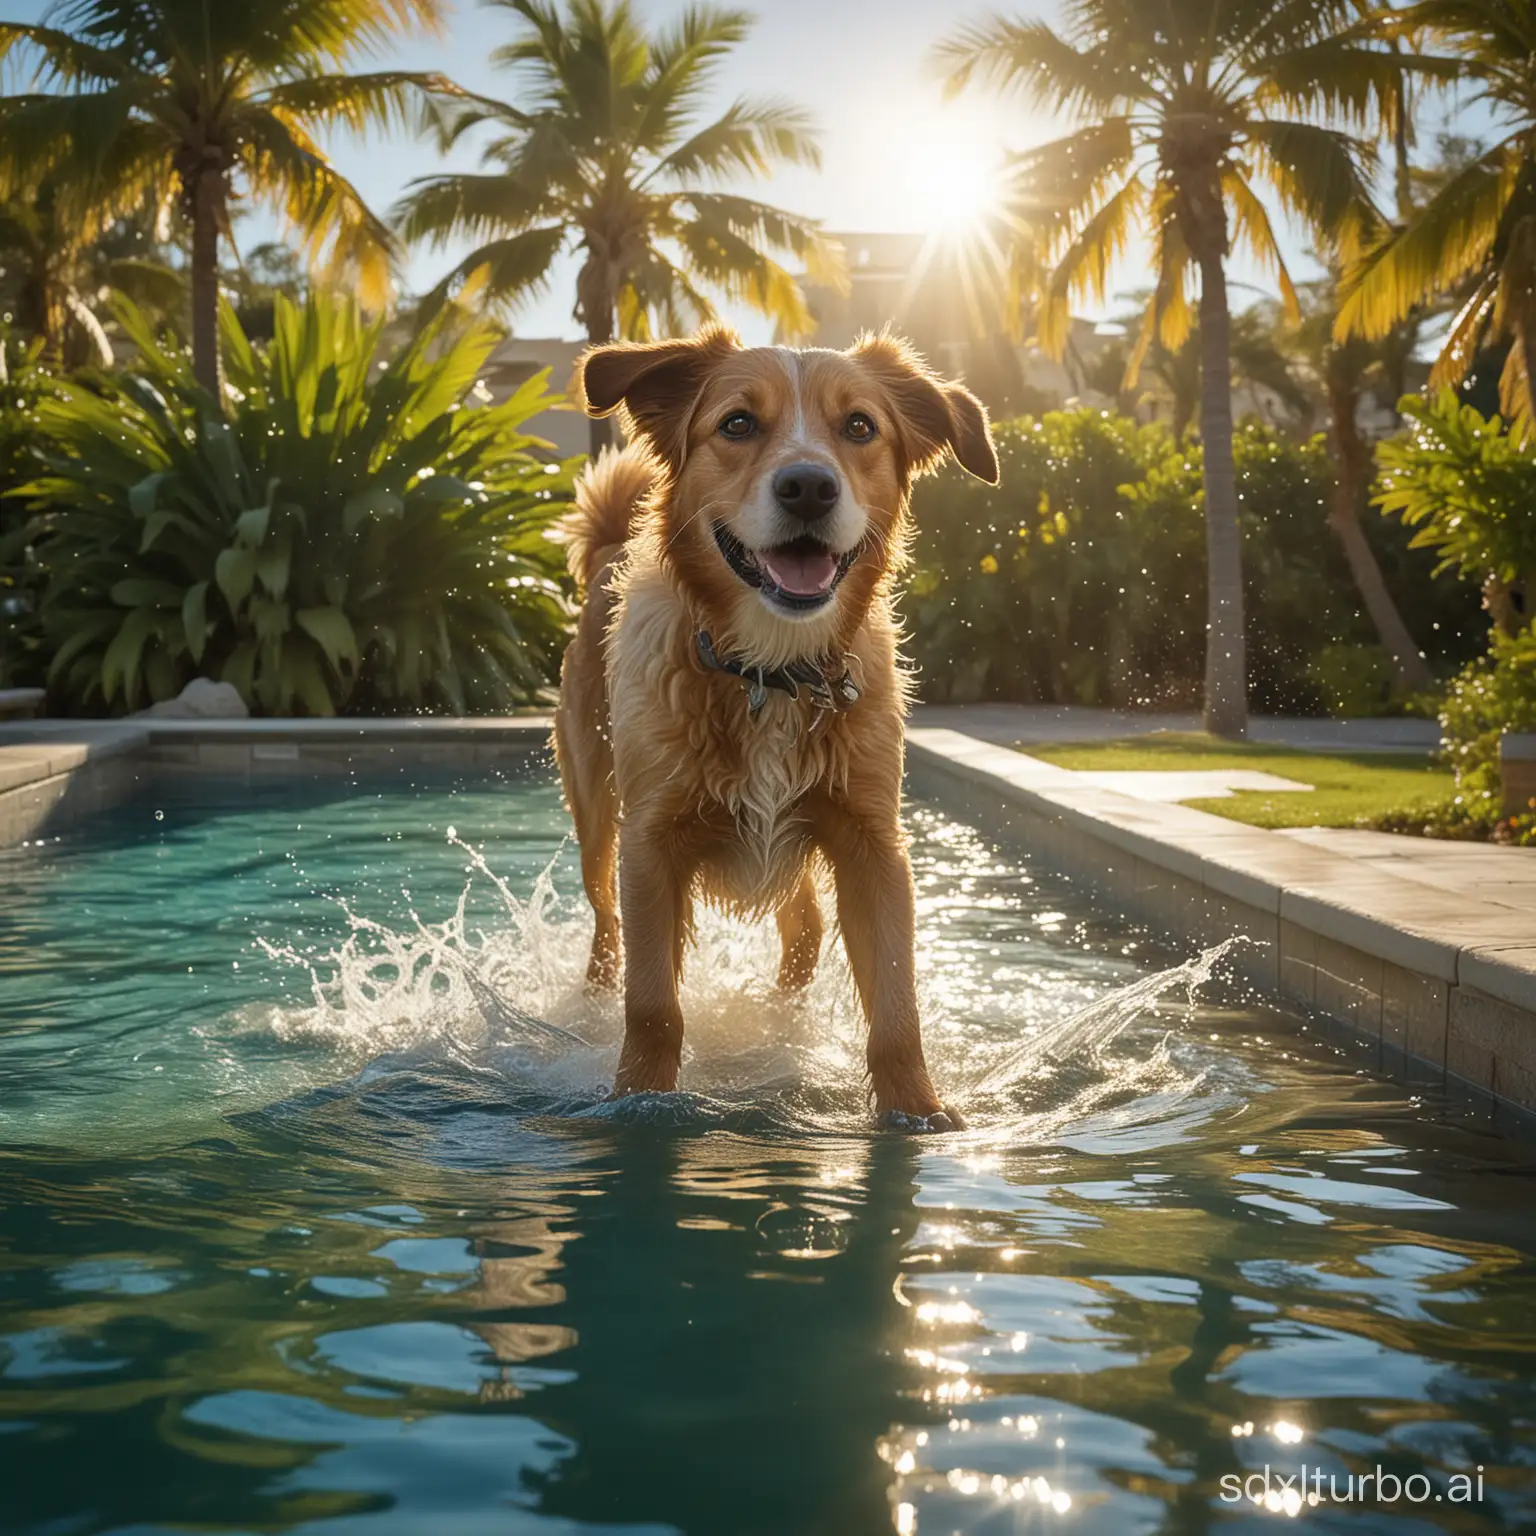 In a summer atmosphere bathed in light, the dazzling sun reflects on a pool of crystalline blue, creating shimmering lights on the surface of the water. In the foreground, a dog, with a coat soaked in shades of gold and honey, stands on the edge of the pool, a joyful expression lighting up its face. Its sparkling eyes are fixed on the sparkling water, ready to dive into this aquatic paradise.  The dog, with each hair reproduced with striking realism, is captured in a moment of anticipation and liveliness. The meticulous details reveal the texture of the coat, the reflections of the sun on its bright coat and the droplets of water pearling on its vibrissae. Splashes of water are already appearing around its paws, freezing the excitement of the moment.  In the background, the palm trees stand majestically, their leaves dancing gently in the summer breeze. The sky is cloudless, offering a dazzling contrast with the lush green of the surrounding plants. Each detail of this scene is impregnated with life, from the shimmering light to the vibrant colors, making this image a true tribute to summer and the joy of life. 